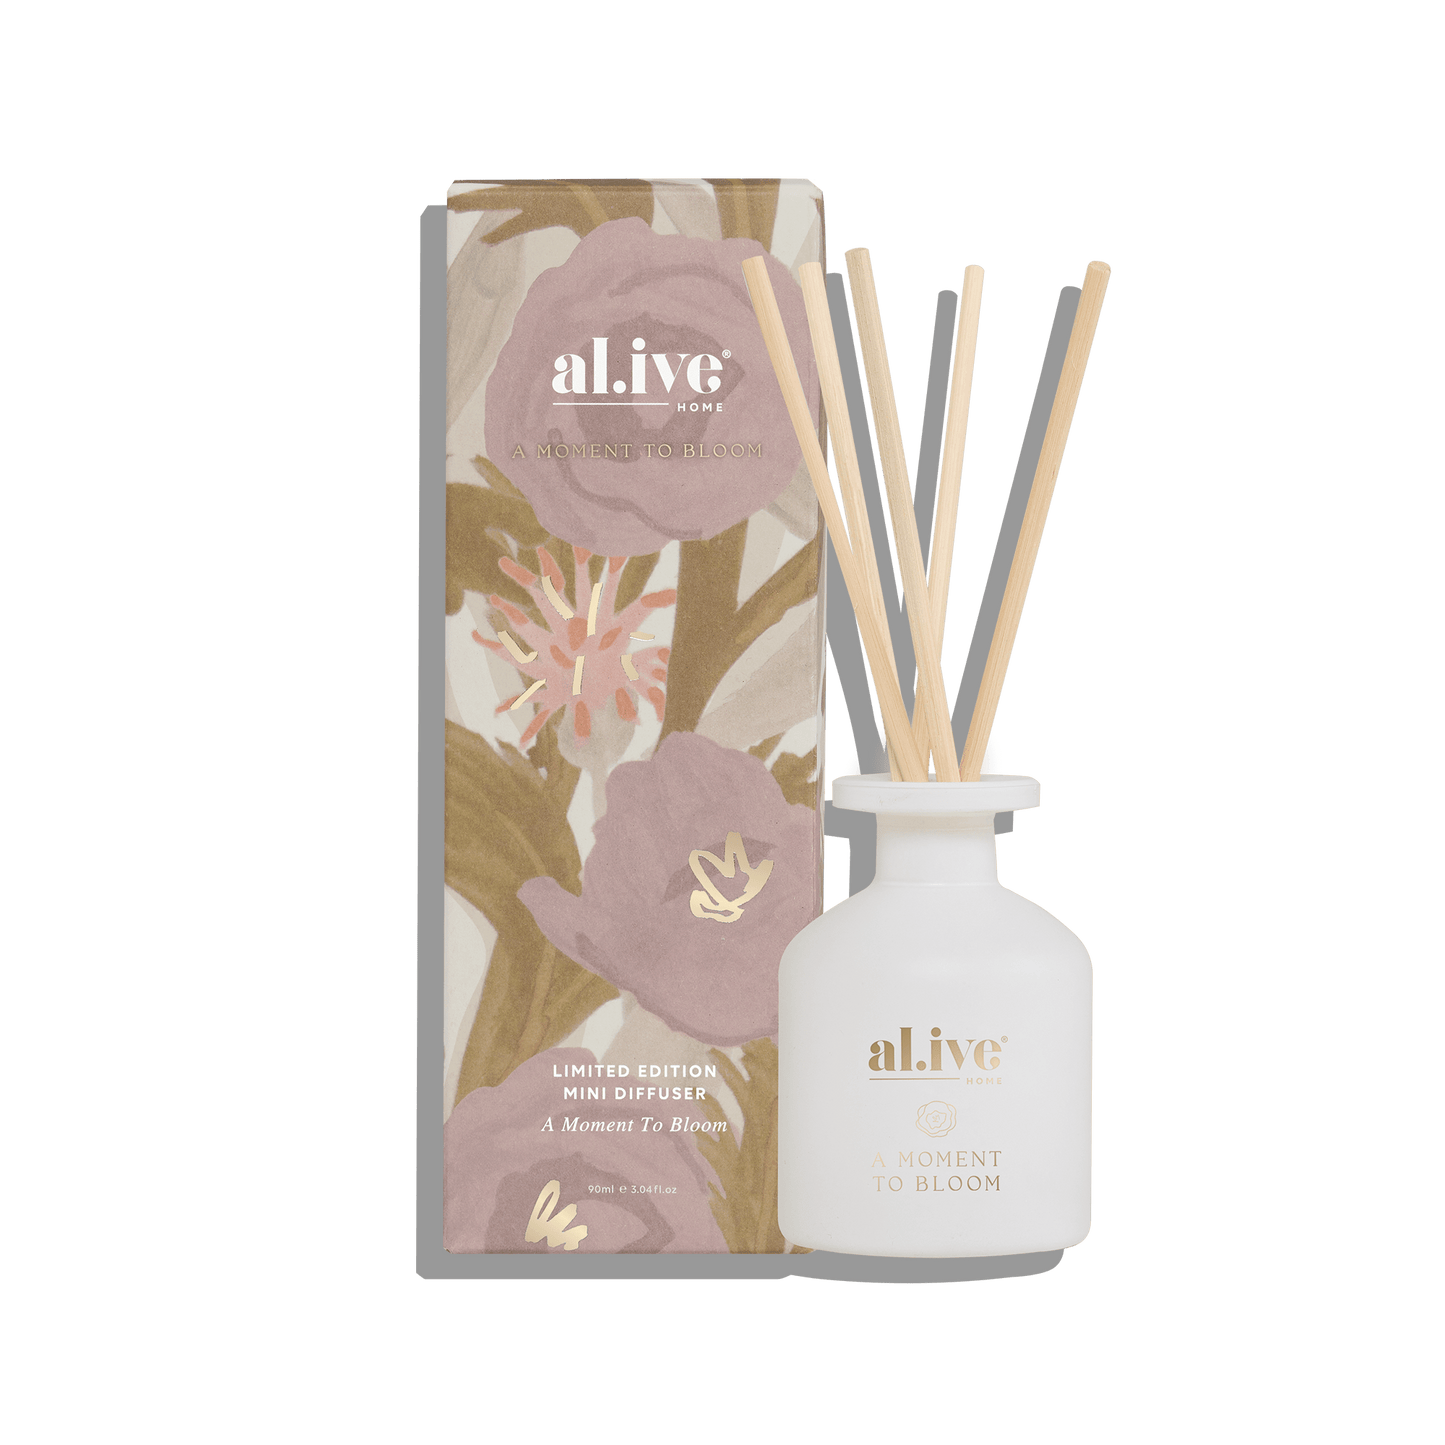 A Moment to bloom diffuser, Alive Body, The Ivy Plant Studio, room scent, diffuser